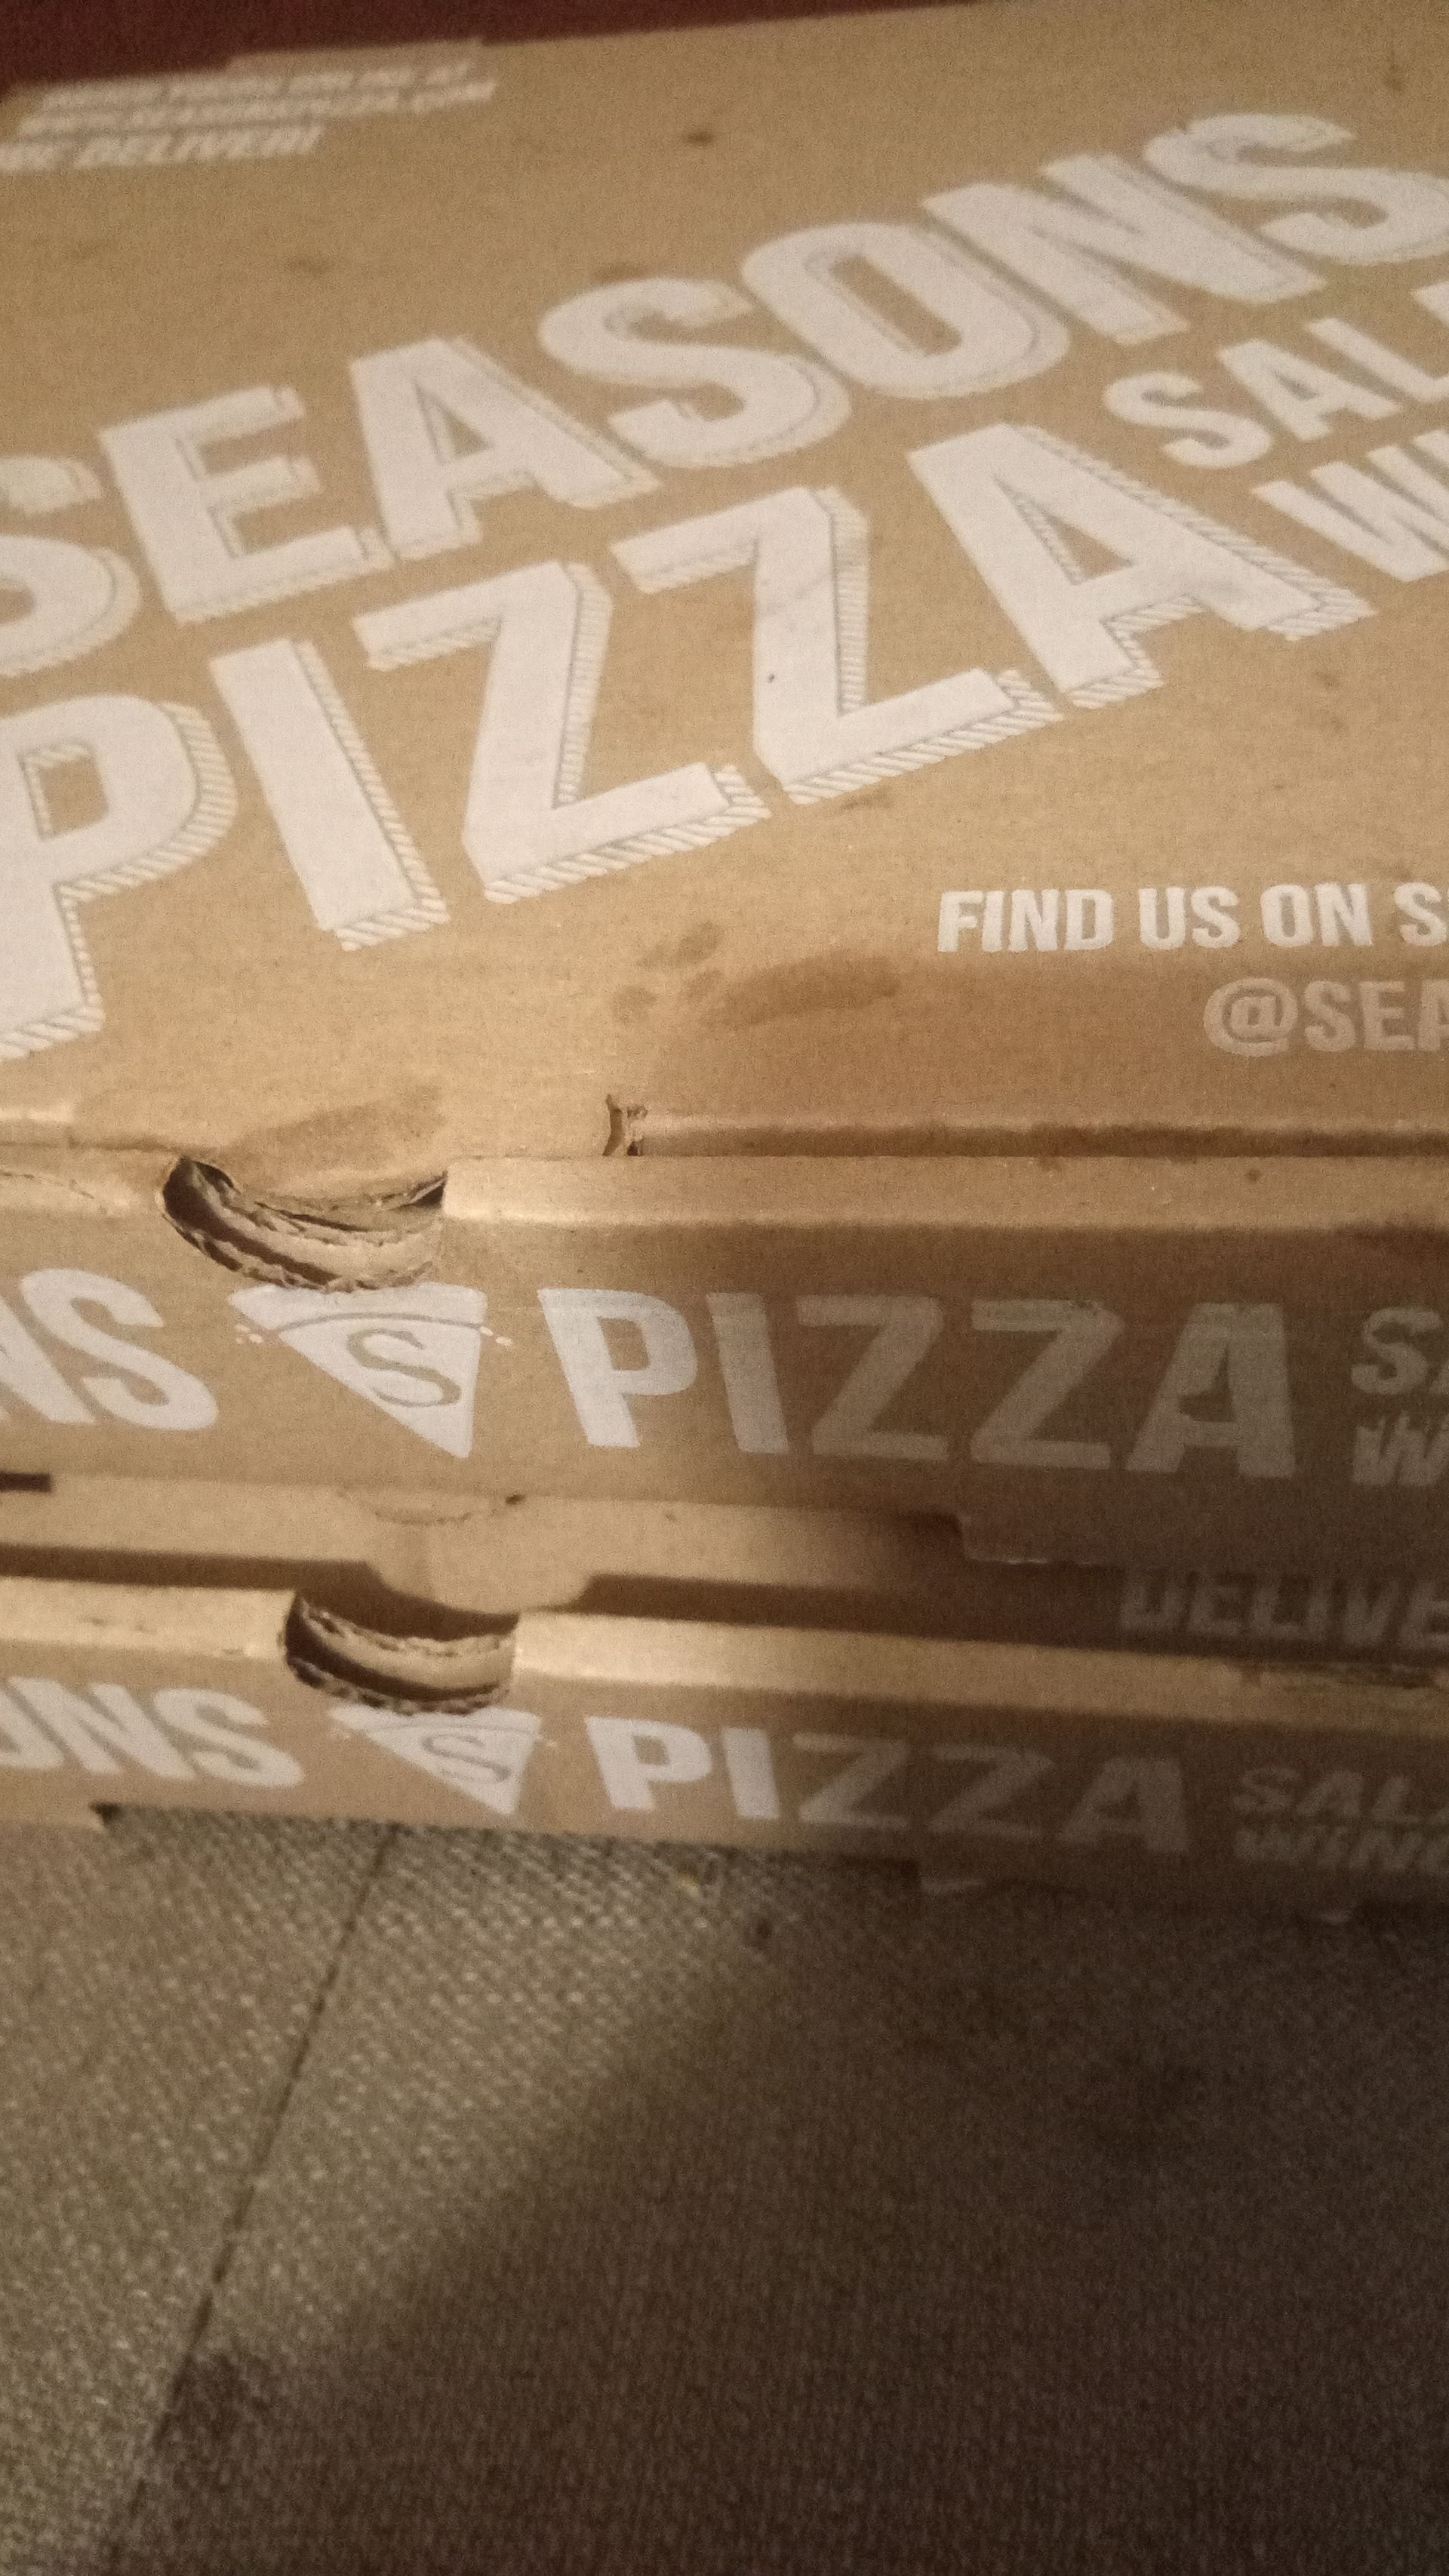 DELIVER
SAL
SEASONS
PIZZA
FIND US ON S
@SEA
AS PIZZAS
DELIVE
NS PIZZA SAL